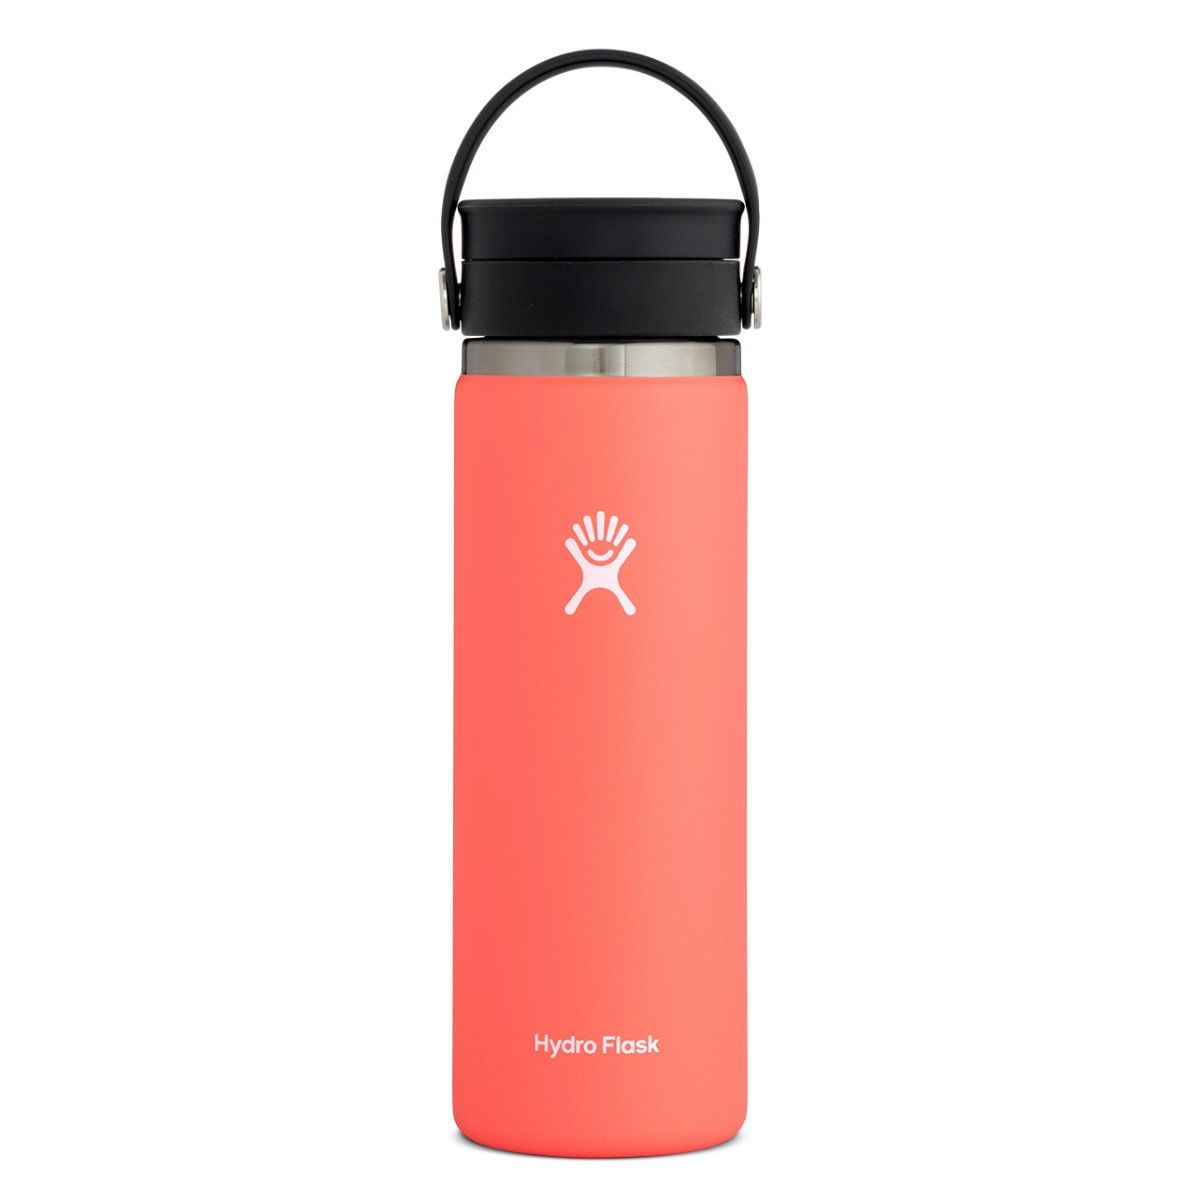 Hydro Flask Vacuum Insulated Stainless Steel Water Bottle 24oz Seagrass Flex